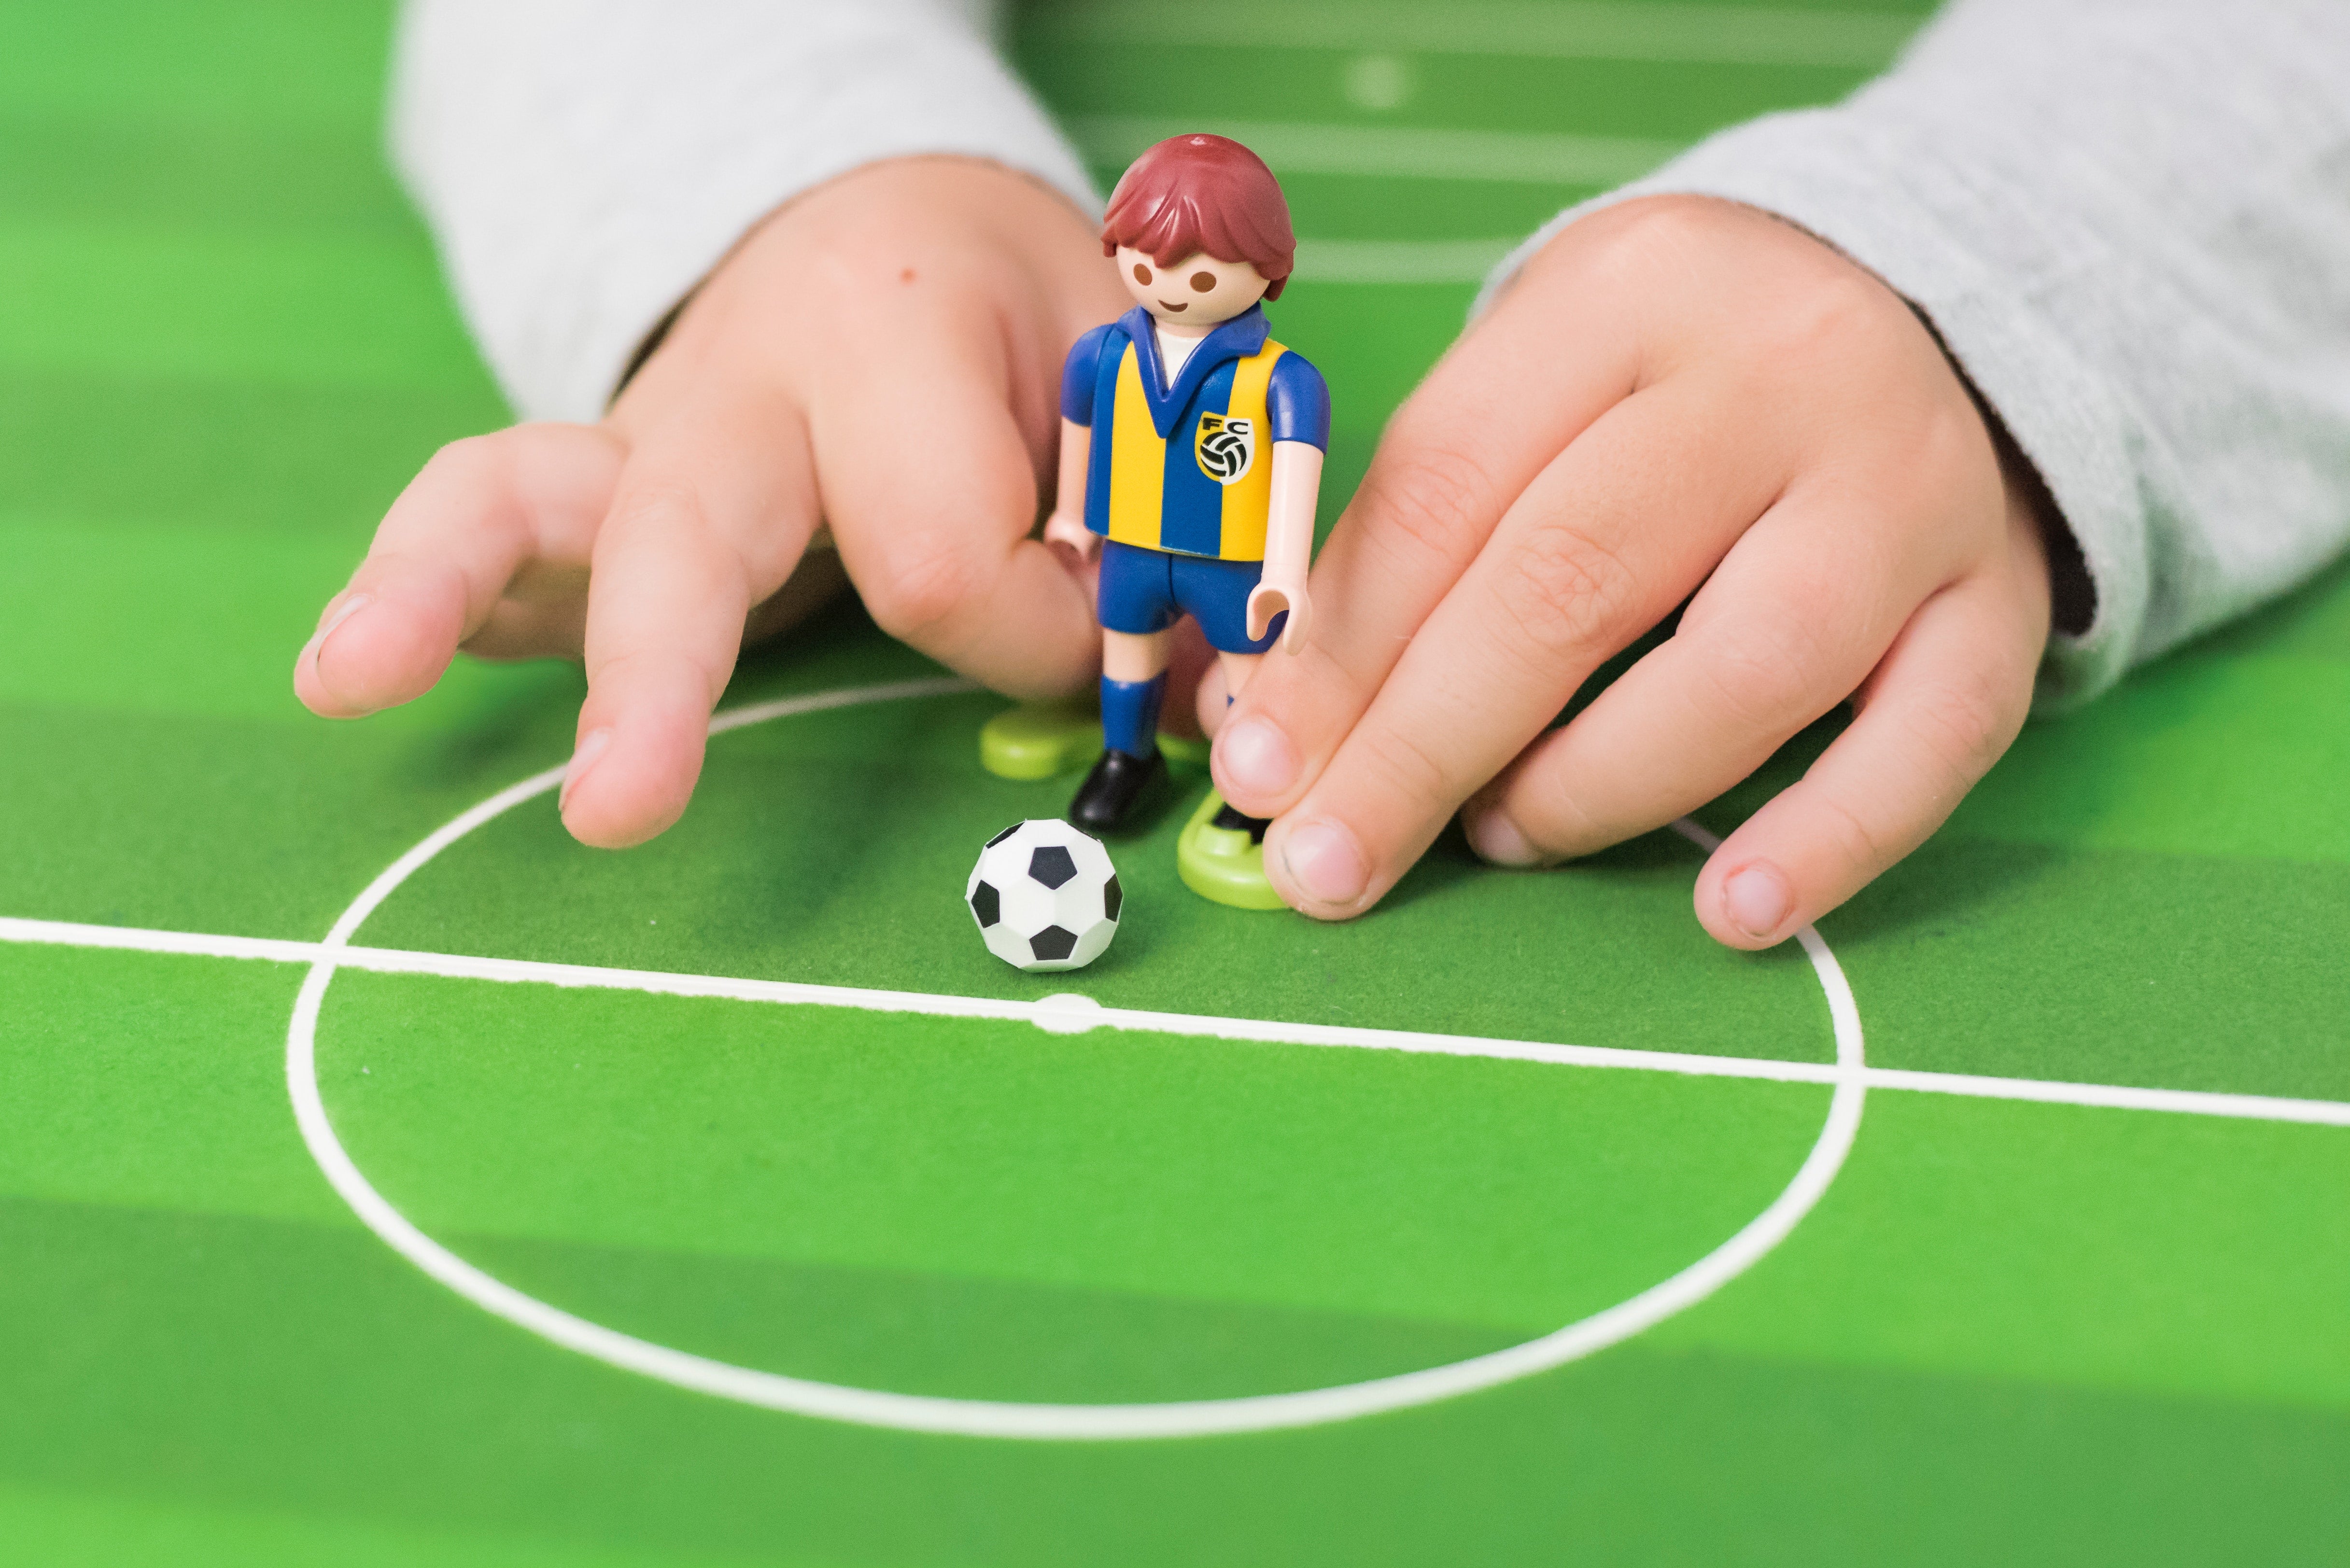 a kid hand playing lego that is about to kick the ball 